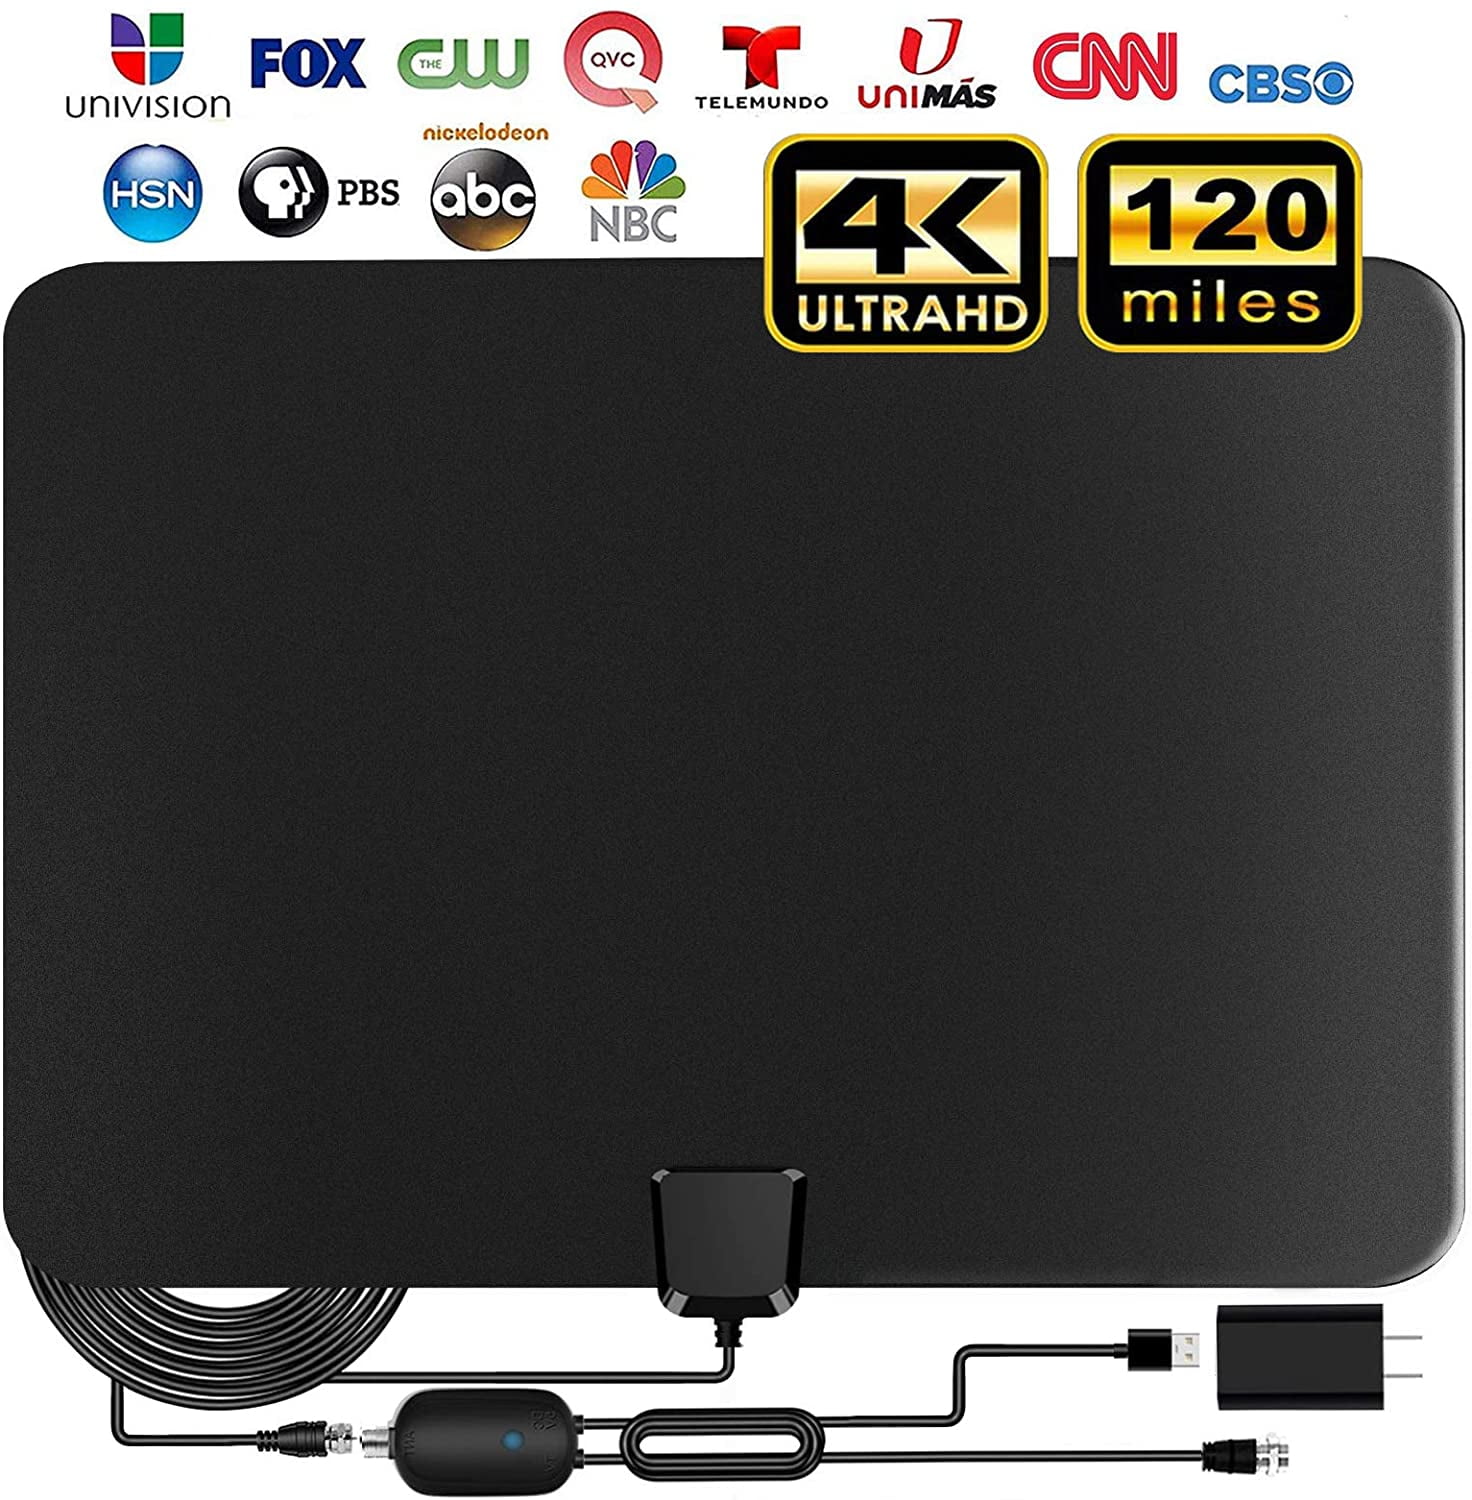 【2020 Newest】TV Antenna,Amplified Indoor HDTV Antenna with Amplifier and Built-in Filter,Support 4K 1080p VHF UHF Free Television Local Channels,Biggest Size for Better Reception,10 Coax Cable 